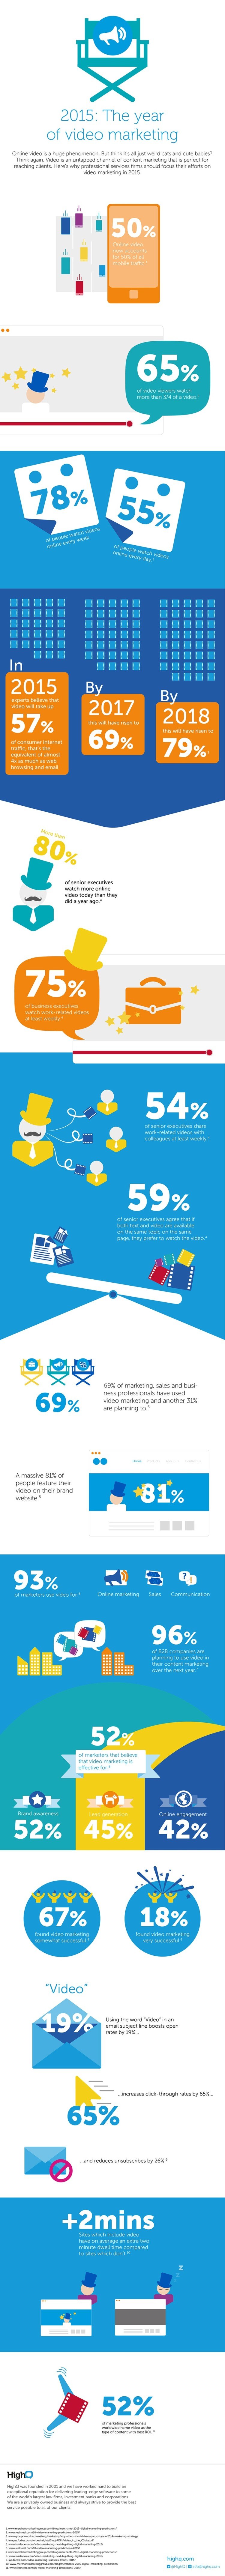 The Year of Video Marketing [Infographic]